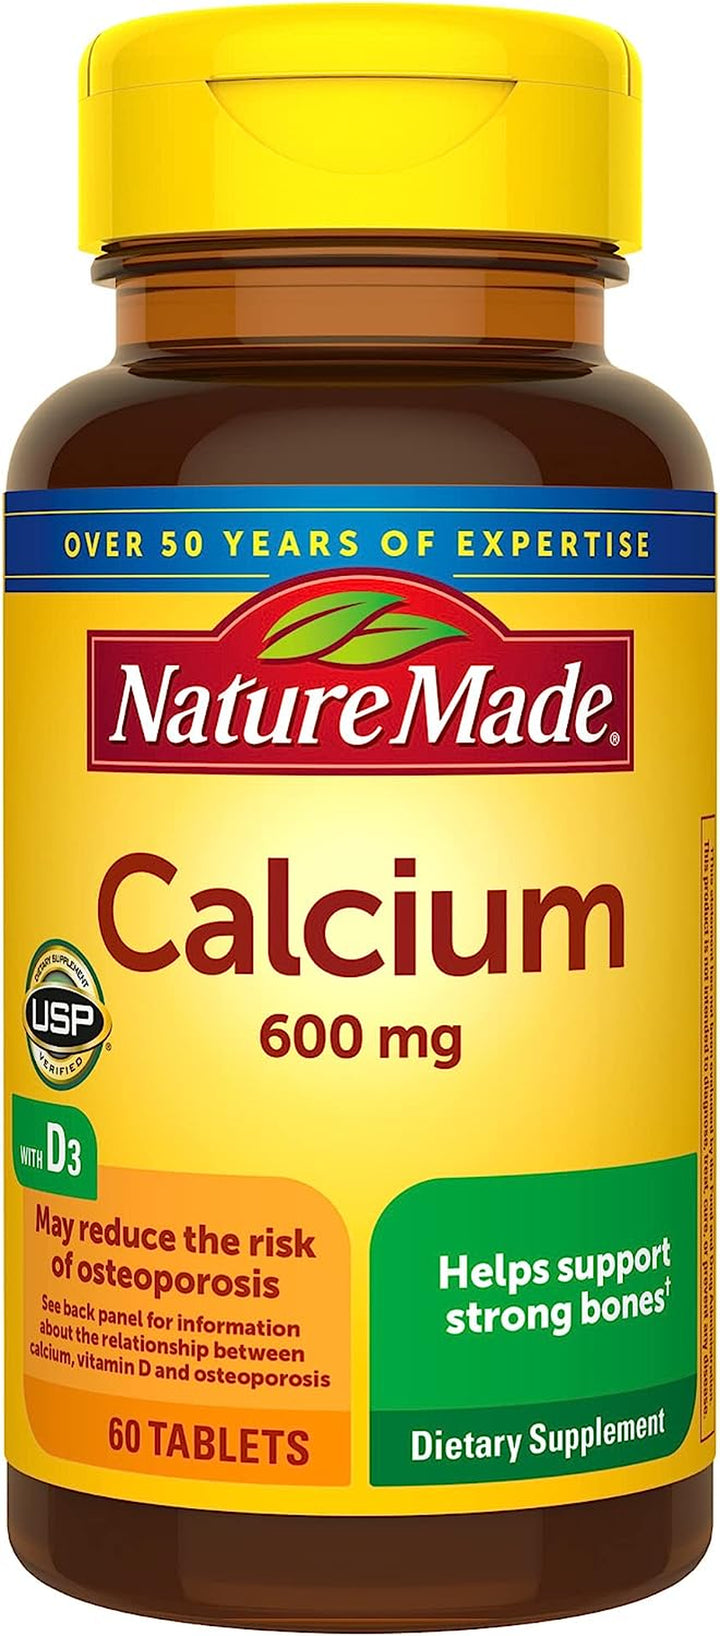 Nature Made Calcium 600 Mg with Vitamin D3, Dietary Supplement for Bone Support, 220 Tablets (Pack of 1)